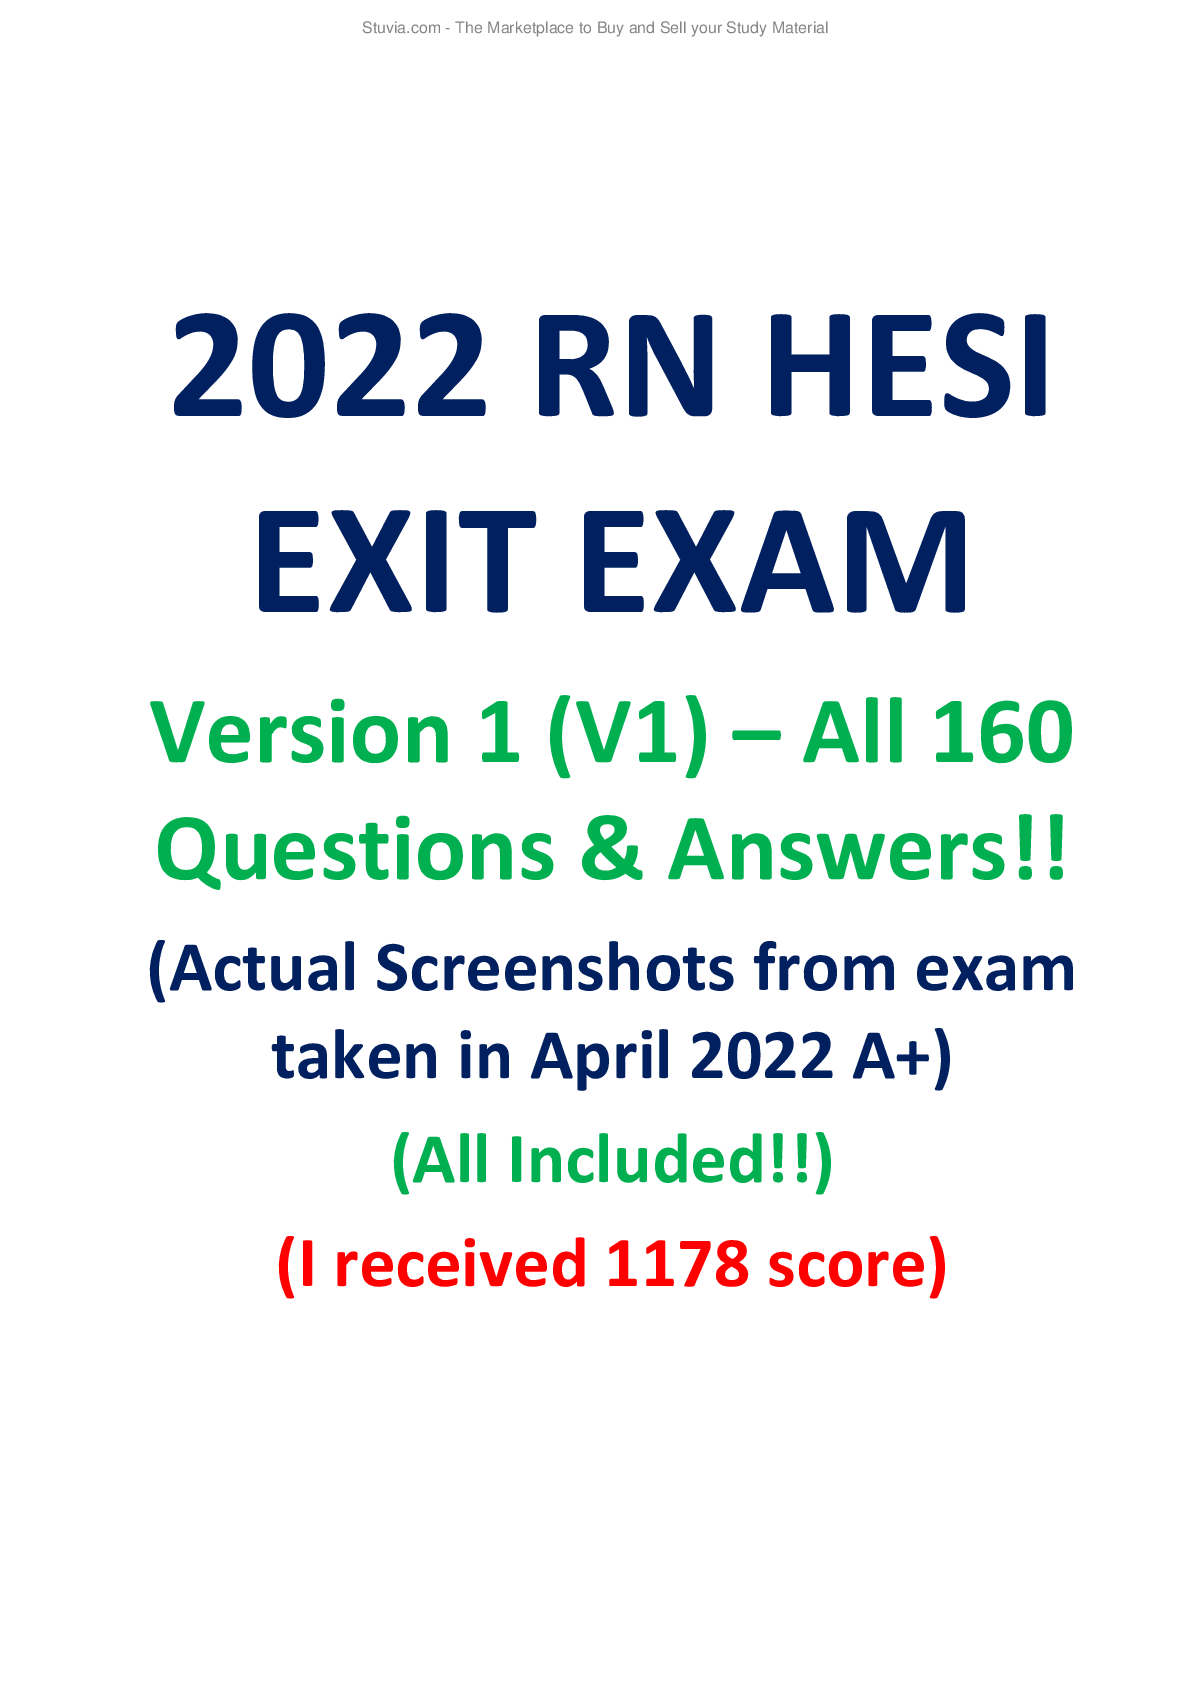 2022 RN HESI EXIT EXAM Version 1 (V1) All 160 Questions & Answers